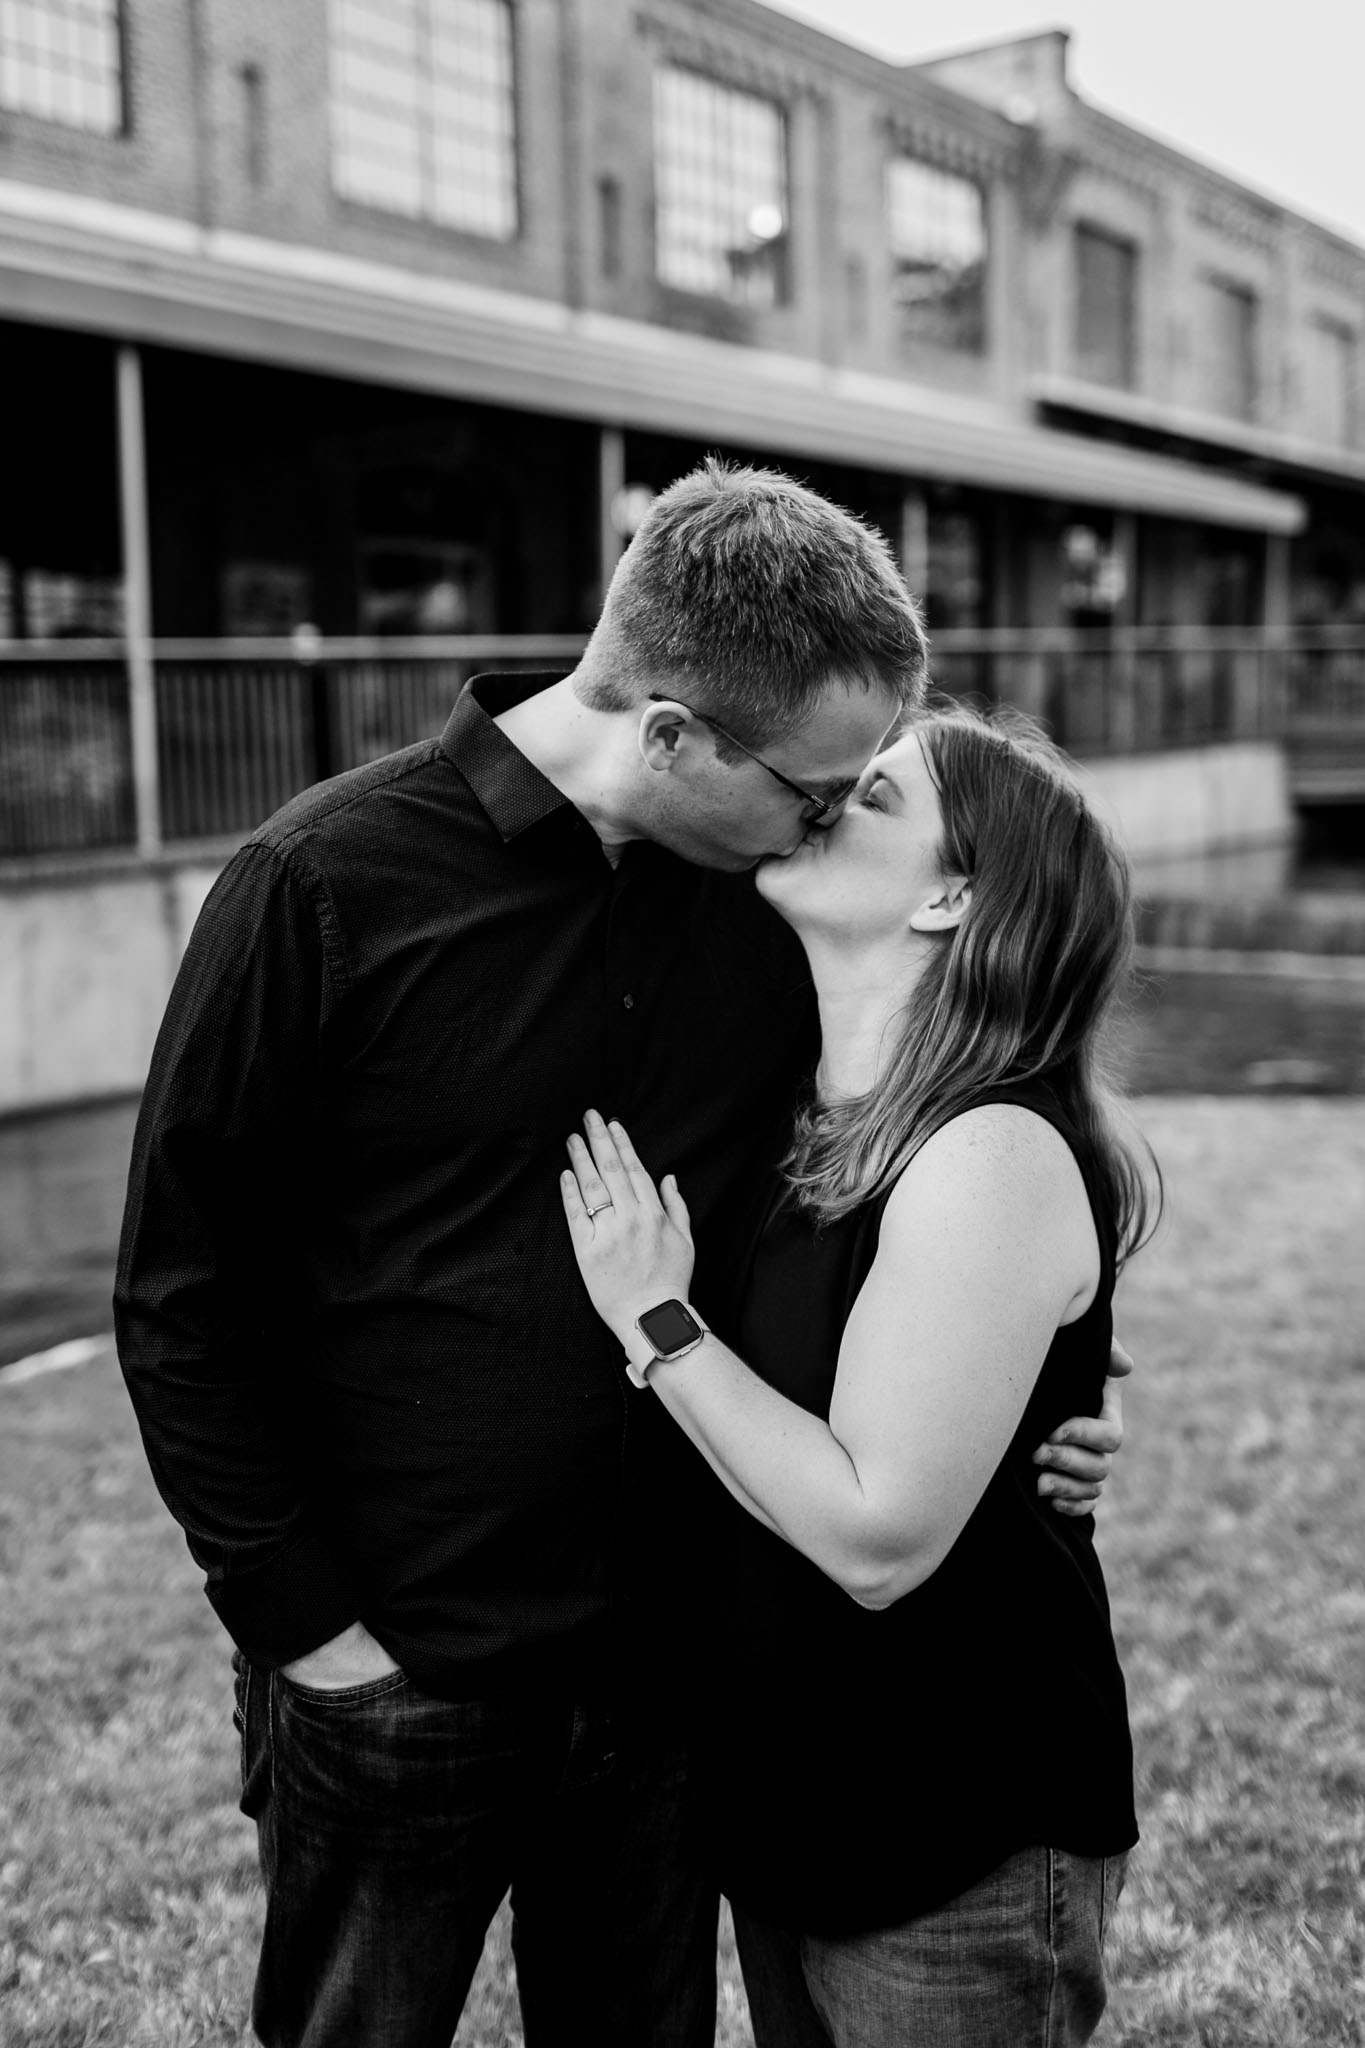 Durham Photographer | Black and white photo of couple kissing | American Tobacco Campus | By G. Lin Photography